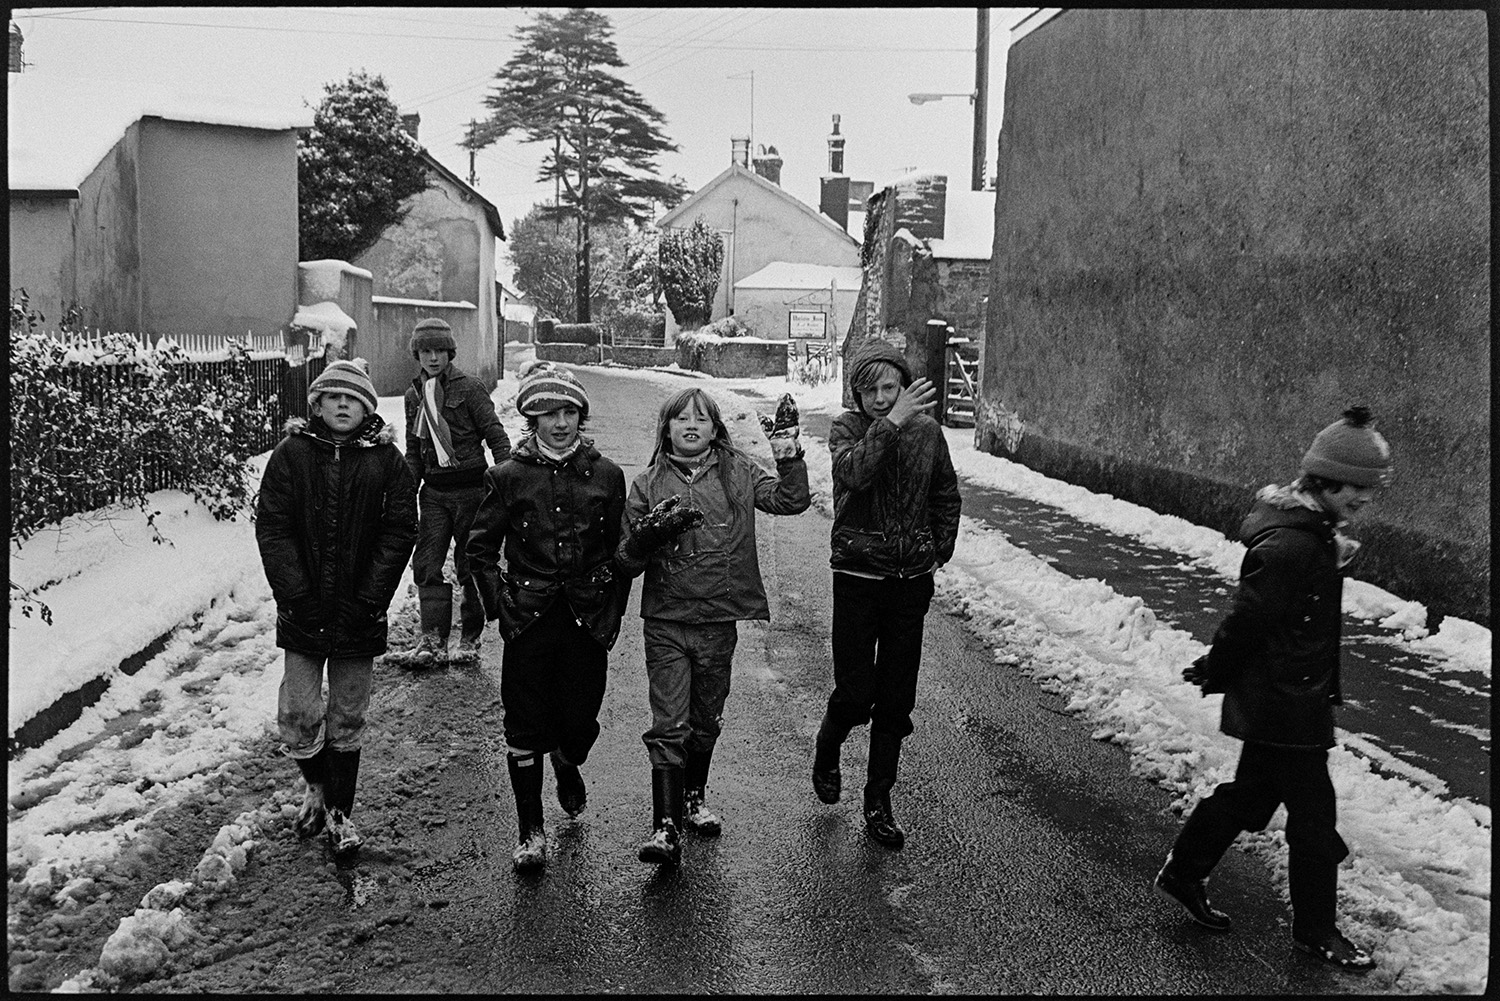 Snow, Street scenes postman and dog, children throwing snowballs, people chatting. 
[Six children walking along a snowy street in Dolton.]